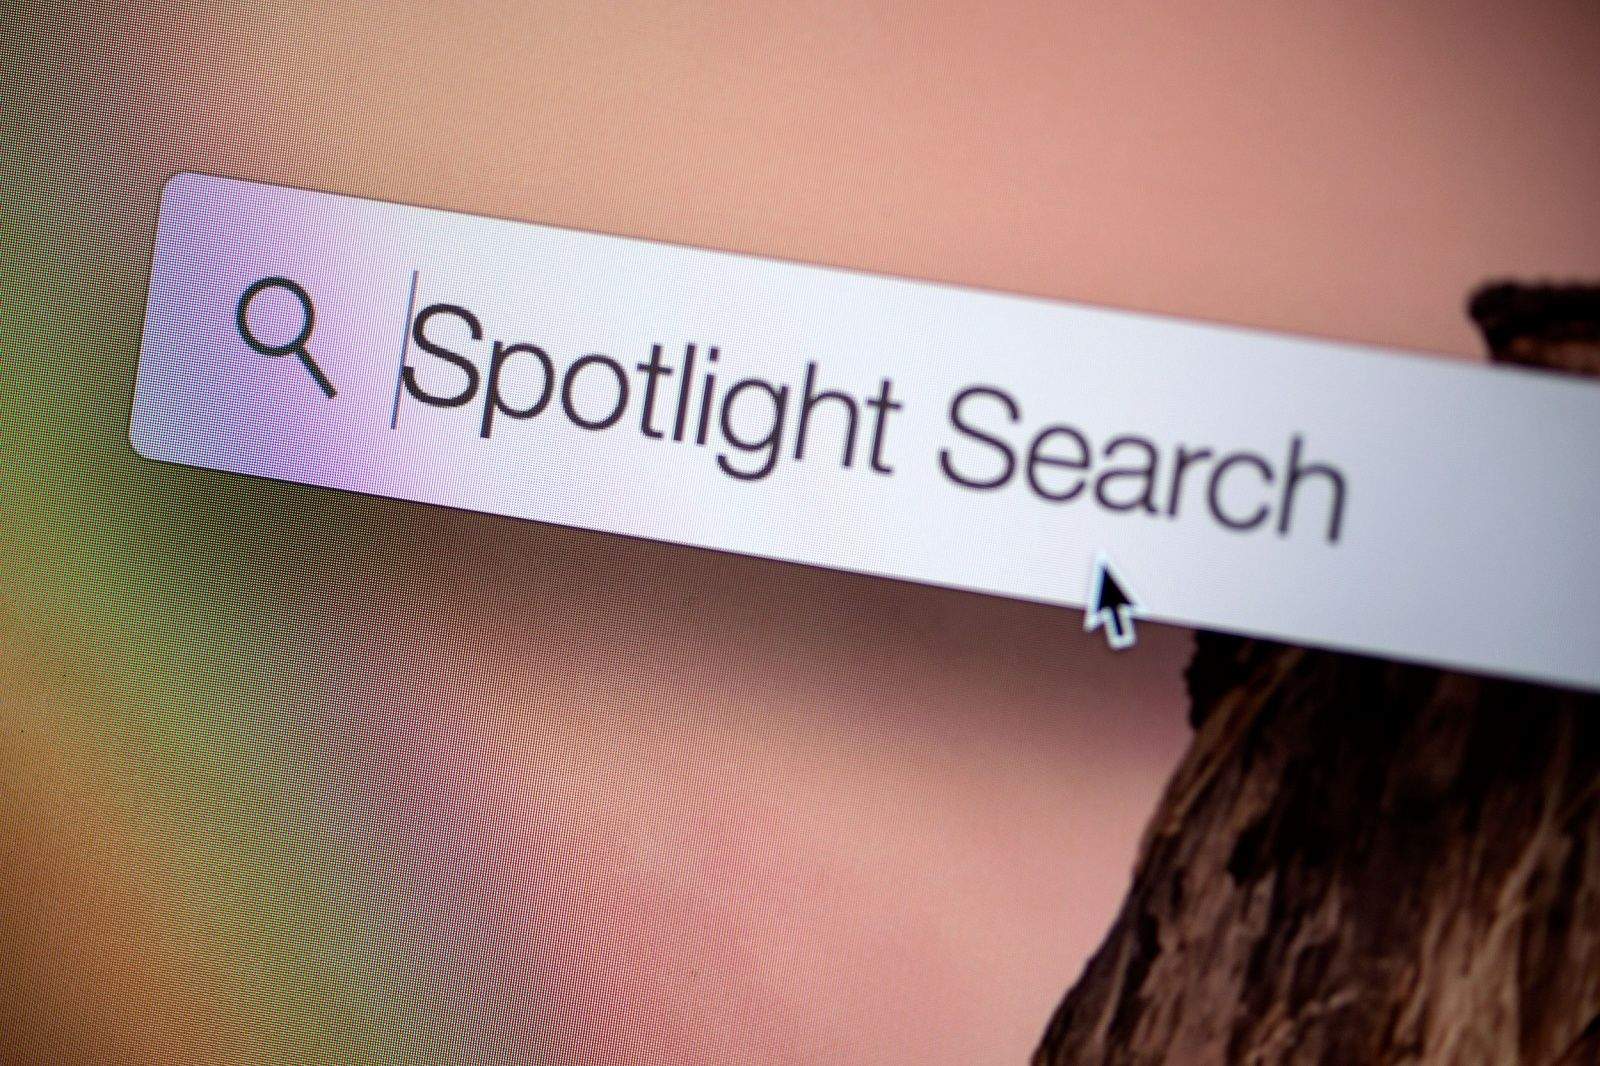 Spotlight Search could be so much better than it already is. Photo: Jim Merithew/Cult of Mac